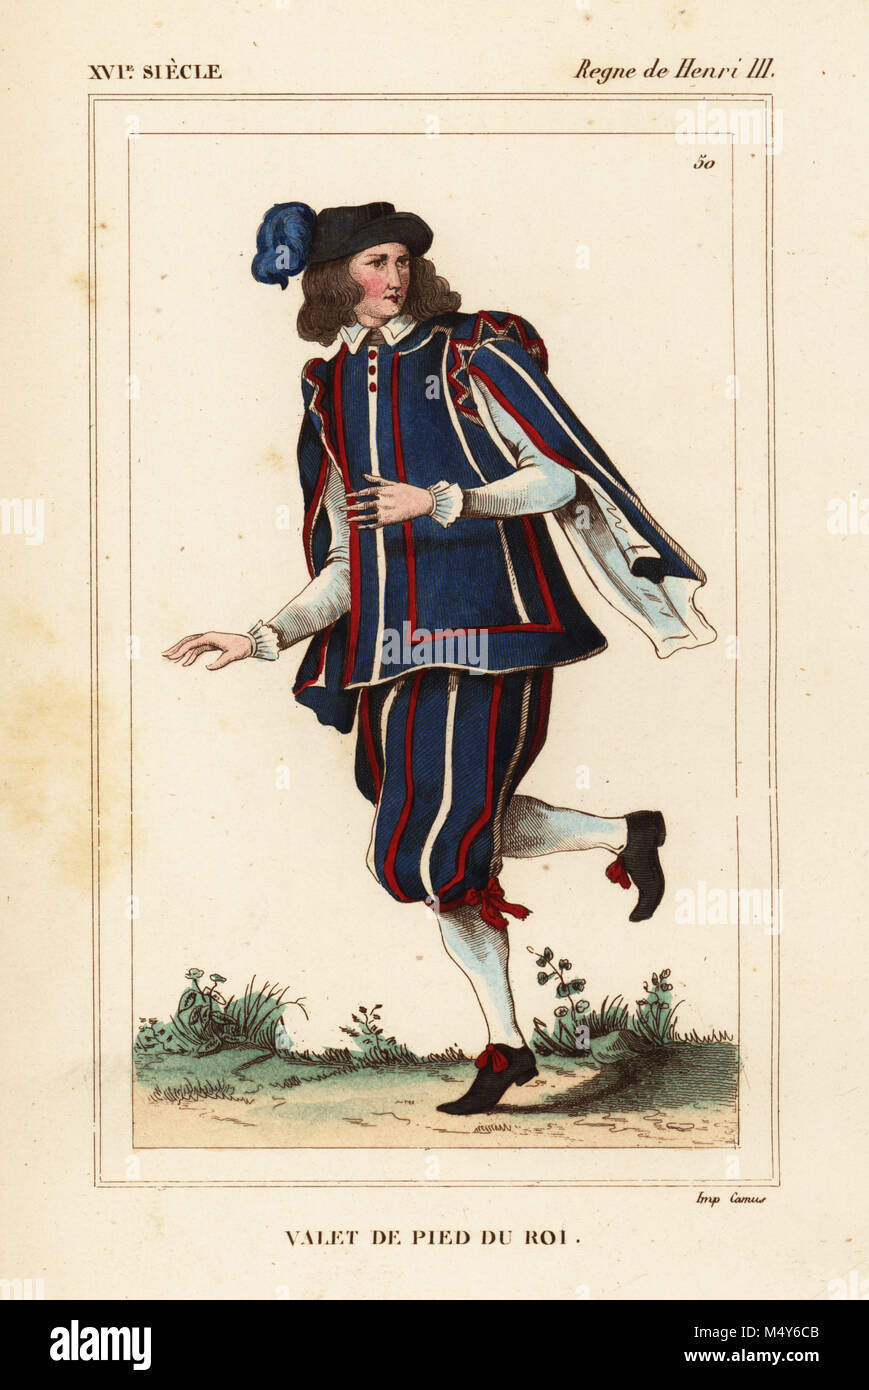 House servant to the king in livery, reign of Henri III of France. Handcoloured lithograph  after a portrait in Roger de Gaignieres' gallery portfolio IX 134 from Le Bibliophile Jacob aka Paul Lacroix's Costumes Historiques de la France (Historical Costumes of France), Administration de Librairie, Paris, 1852. Stock Photo